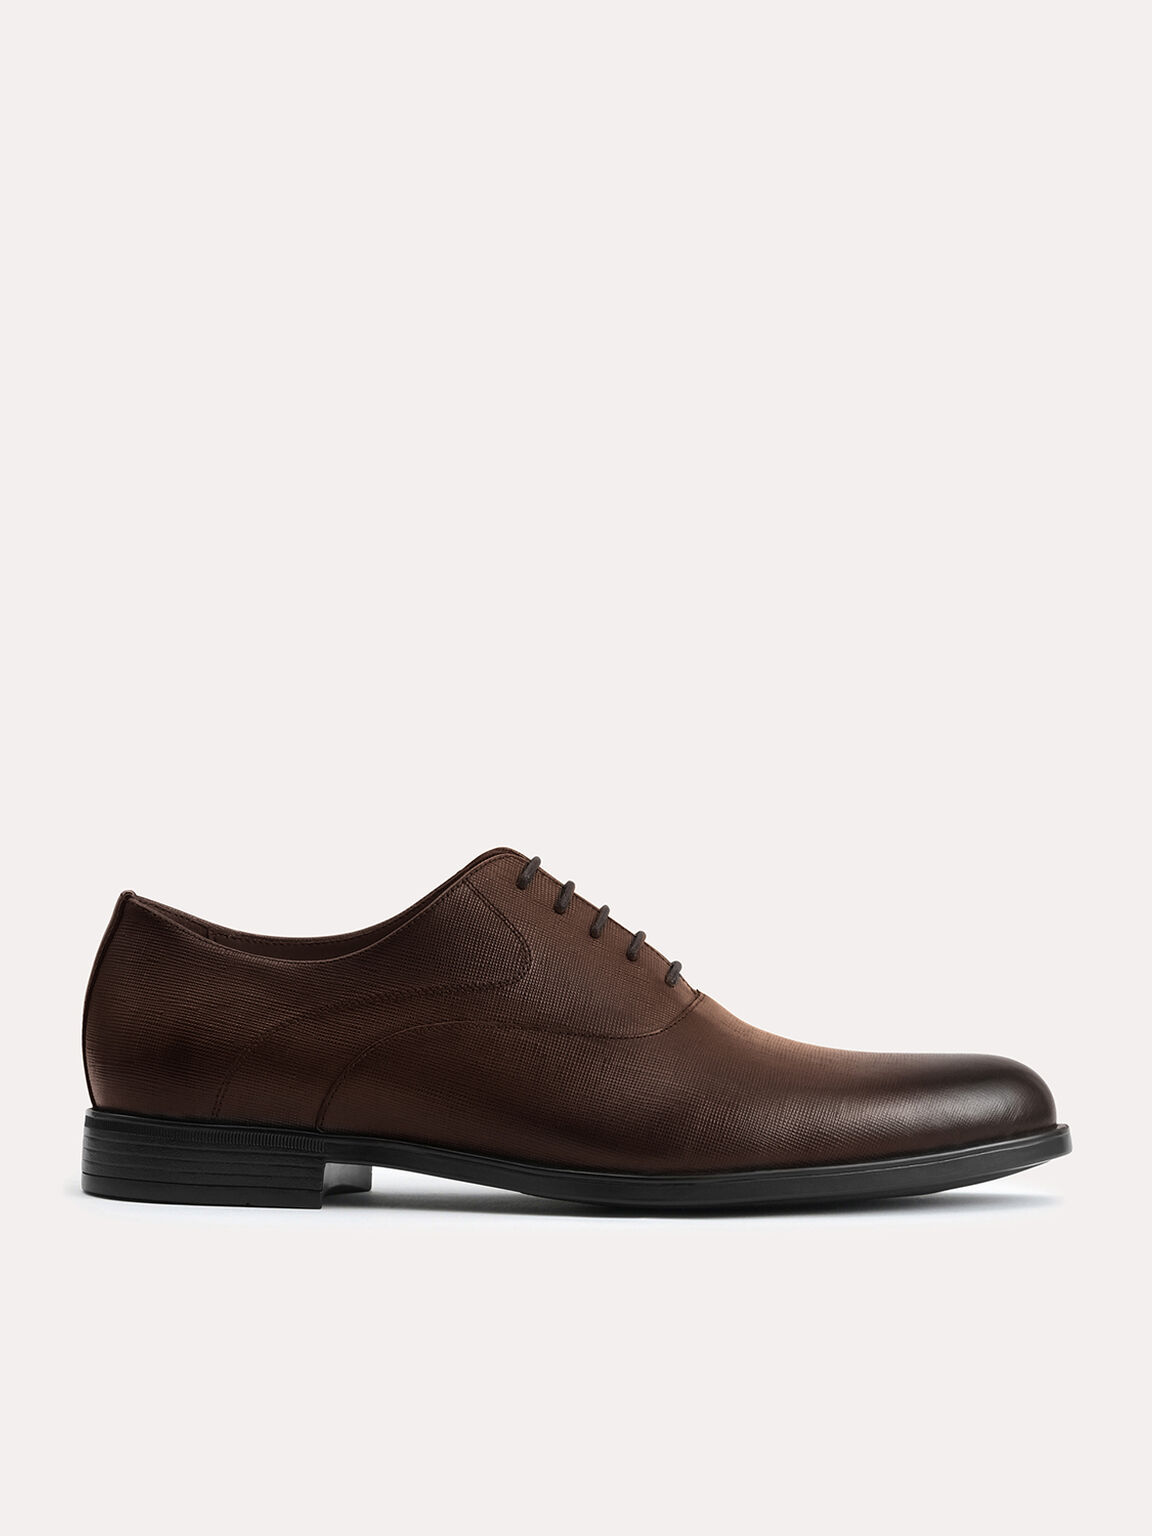 Textured Leather Oxfords, Brown, hi-res